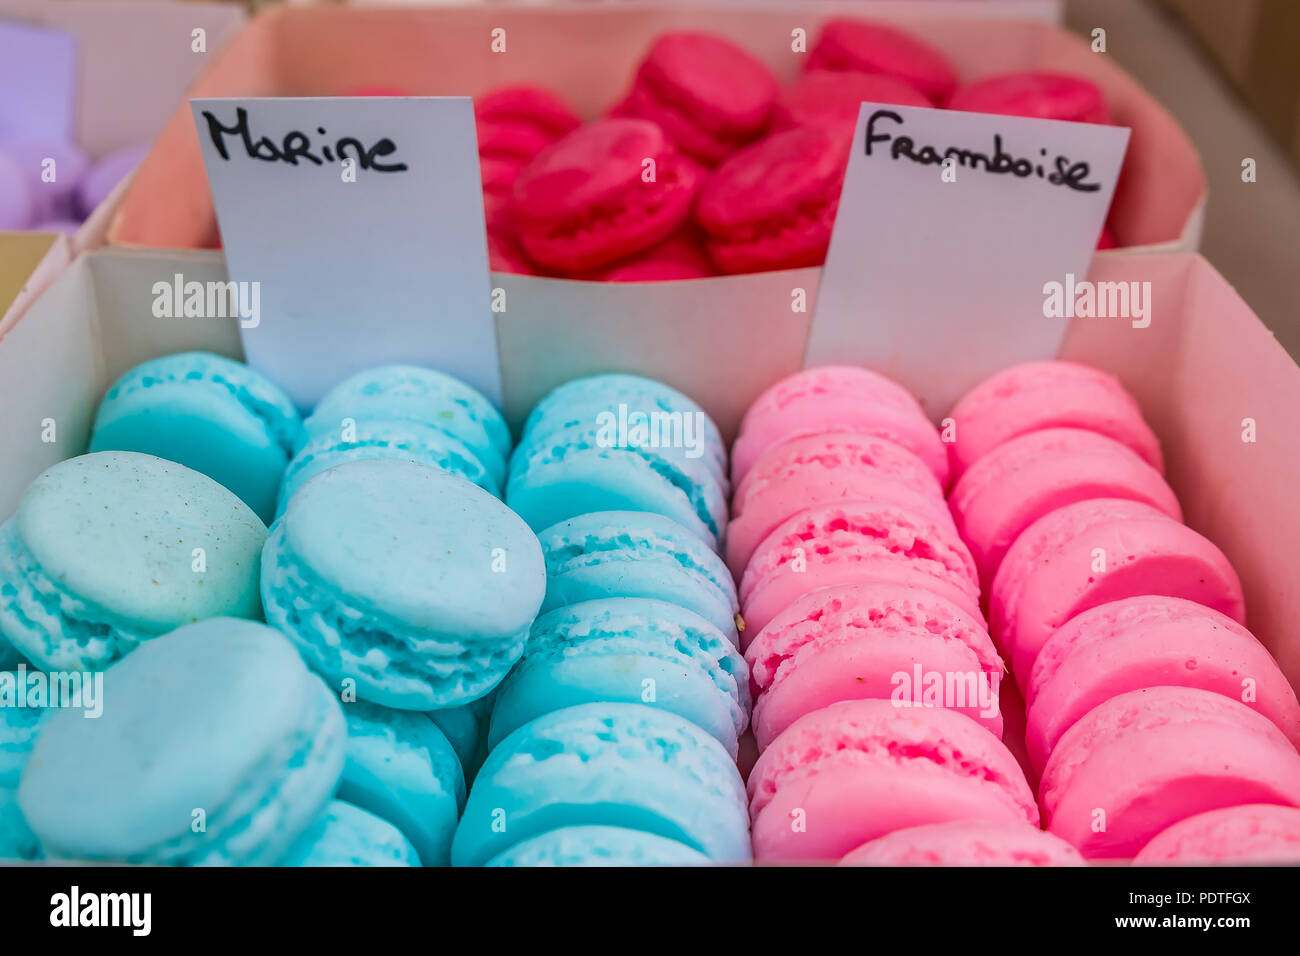 Colorful macarons in boxes for sale at a market stall in Southern France in Nice Stock Photo